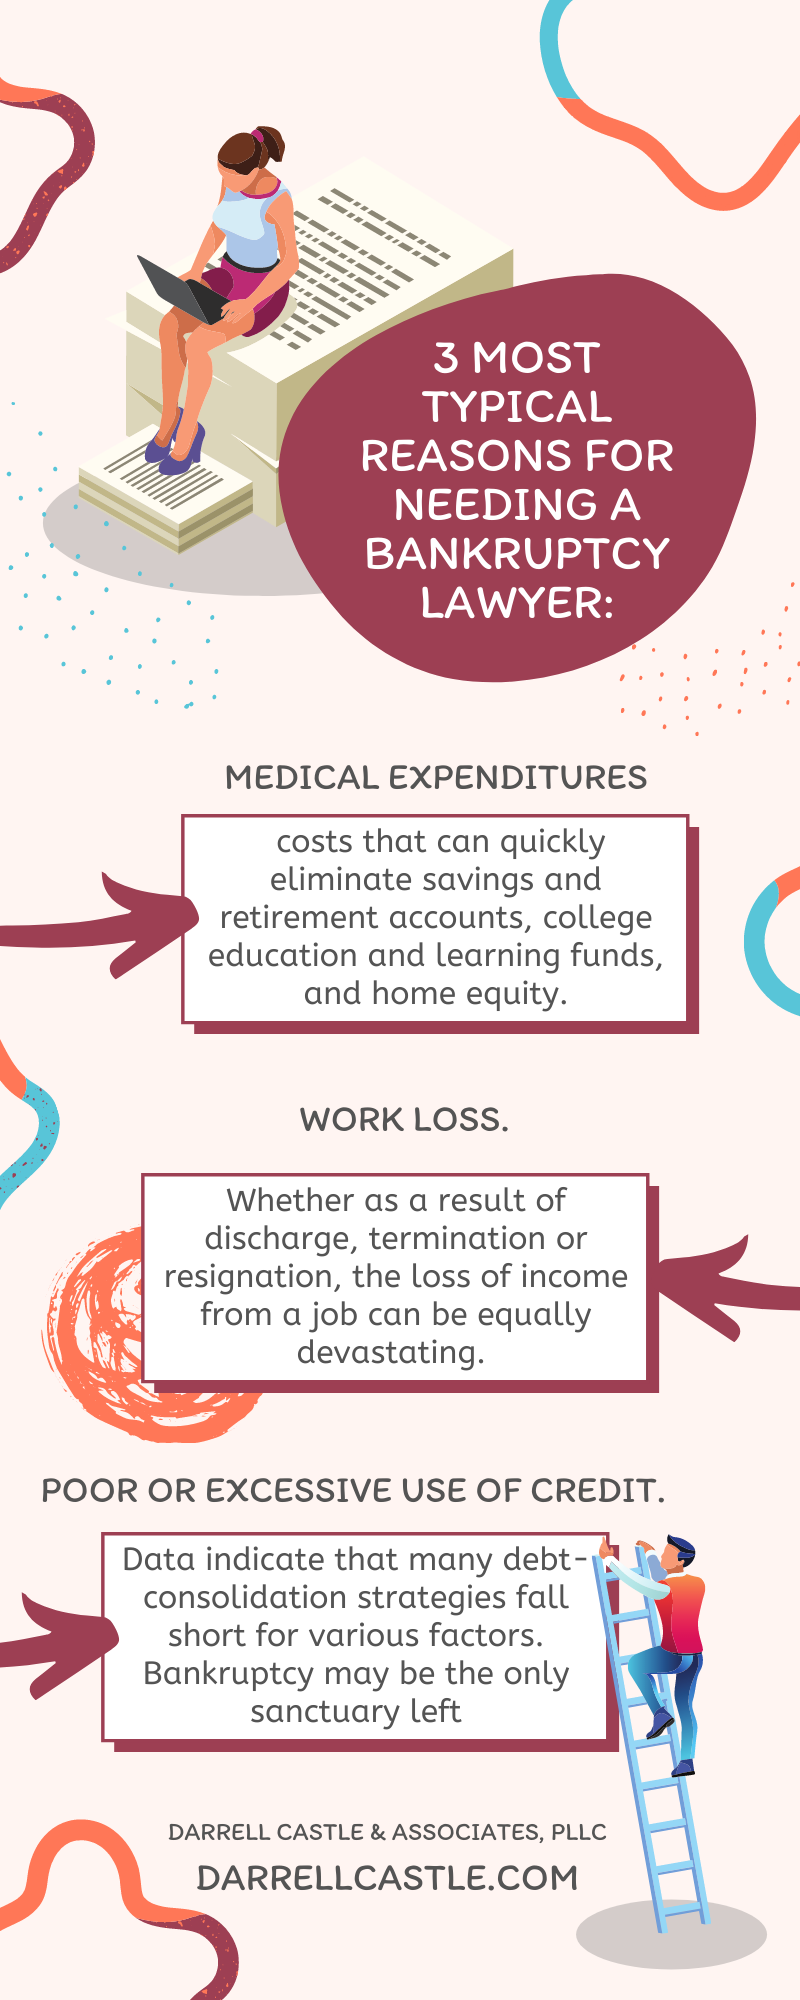 Three most typical reasons for needing a bankruptcy lawyer Infographic